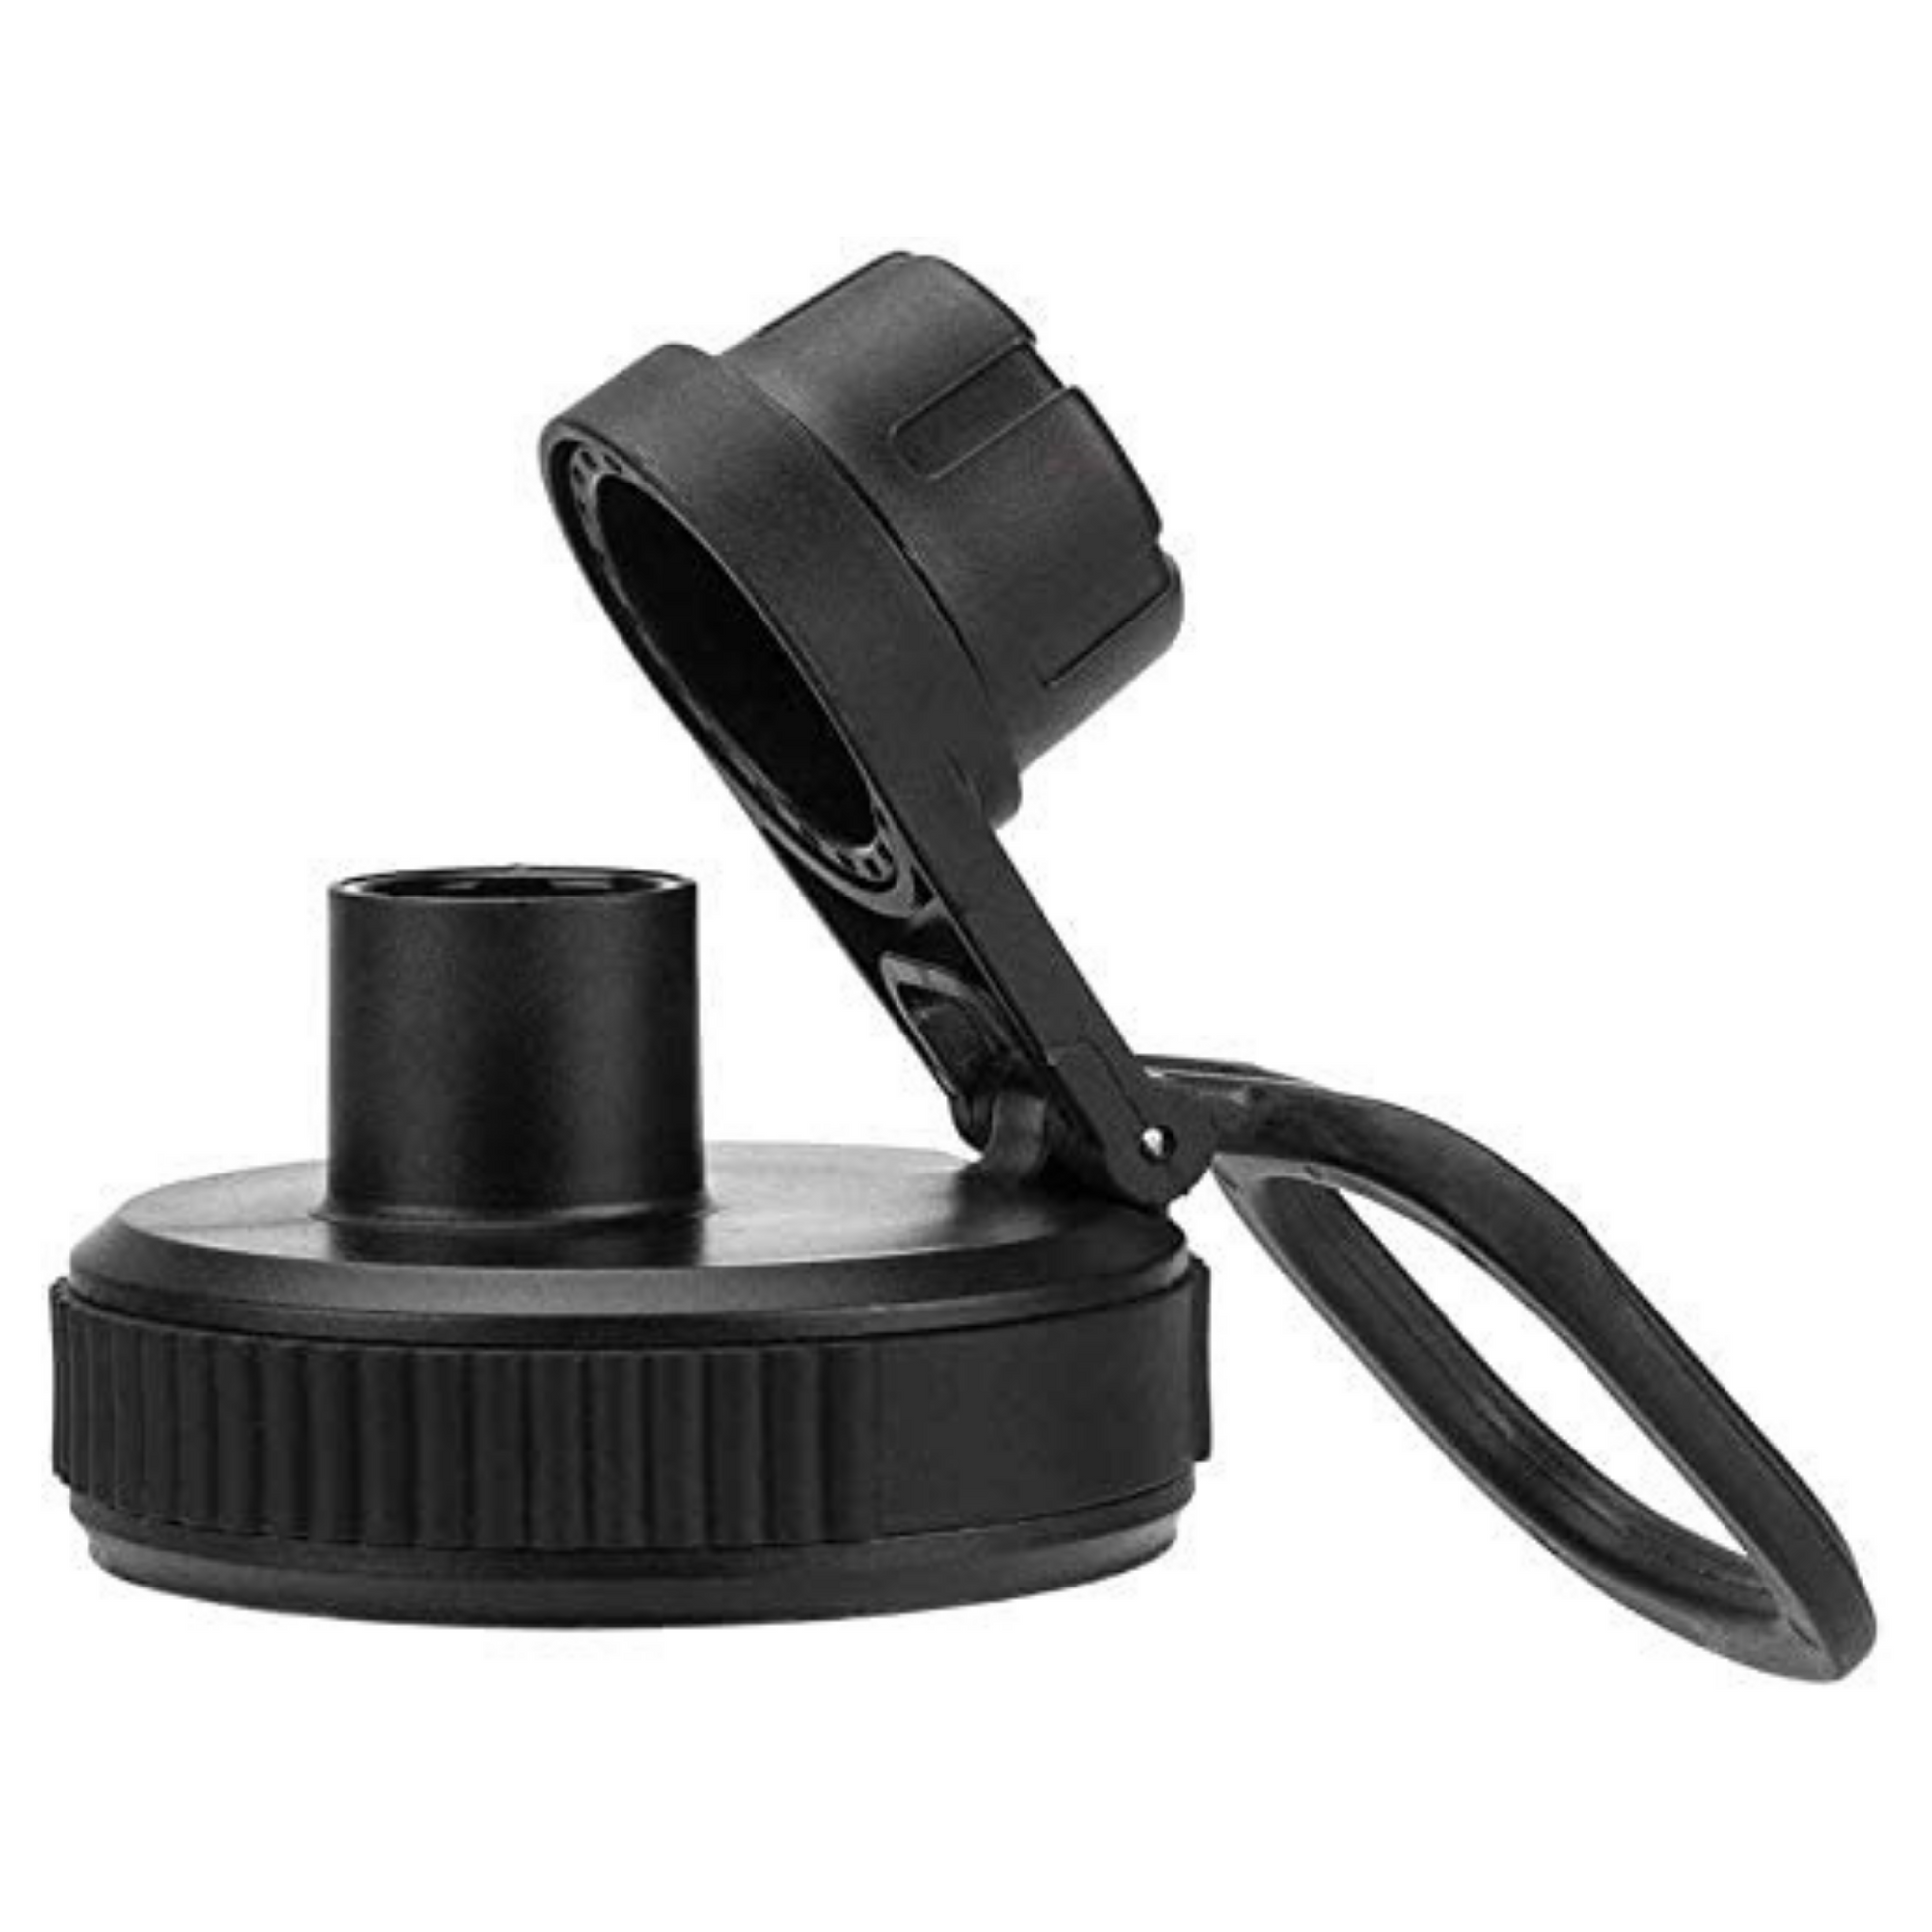 Nurich Green Hydro Wide Mouth Flip and Sip Replacement Coffee Lid or Cap Accessories Compatible with Hydroflask, Nalgene, and Many More Top Water